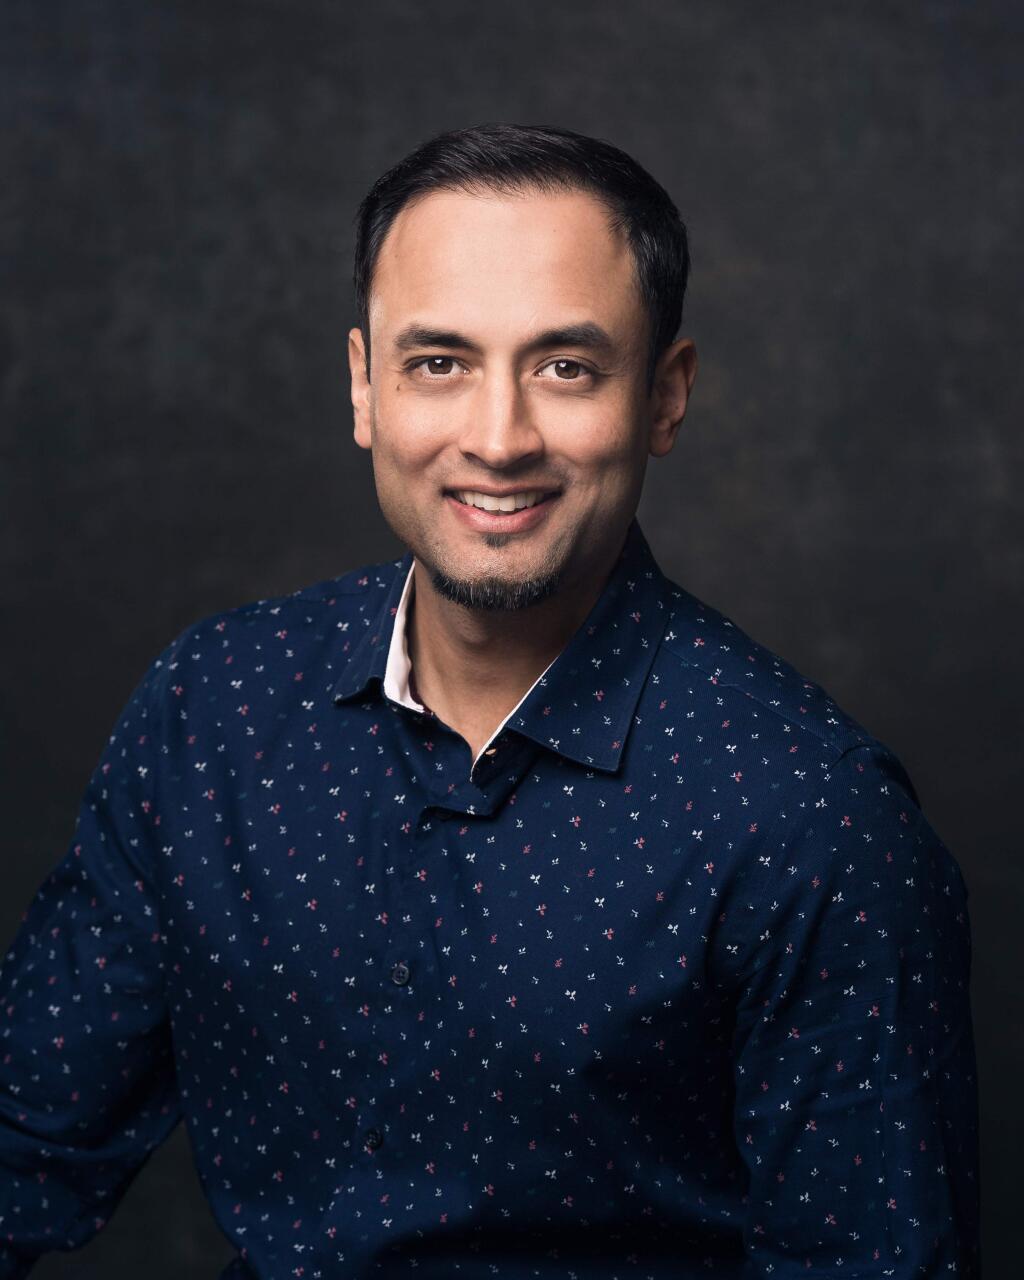 Ashish Patel, 37, owner of Olea Hotel in Glen Ellen in Sonoma Valley, is one of North Bay Business Journal's Forty Under 40 notable young professionals for 2019. (PROVIDED PHOTO)